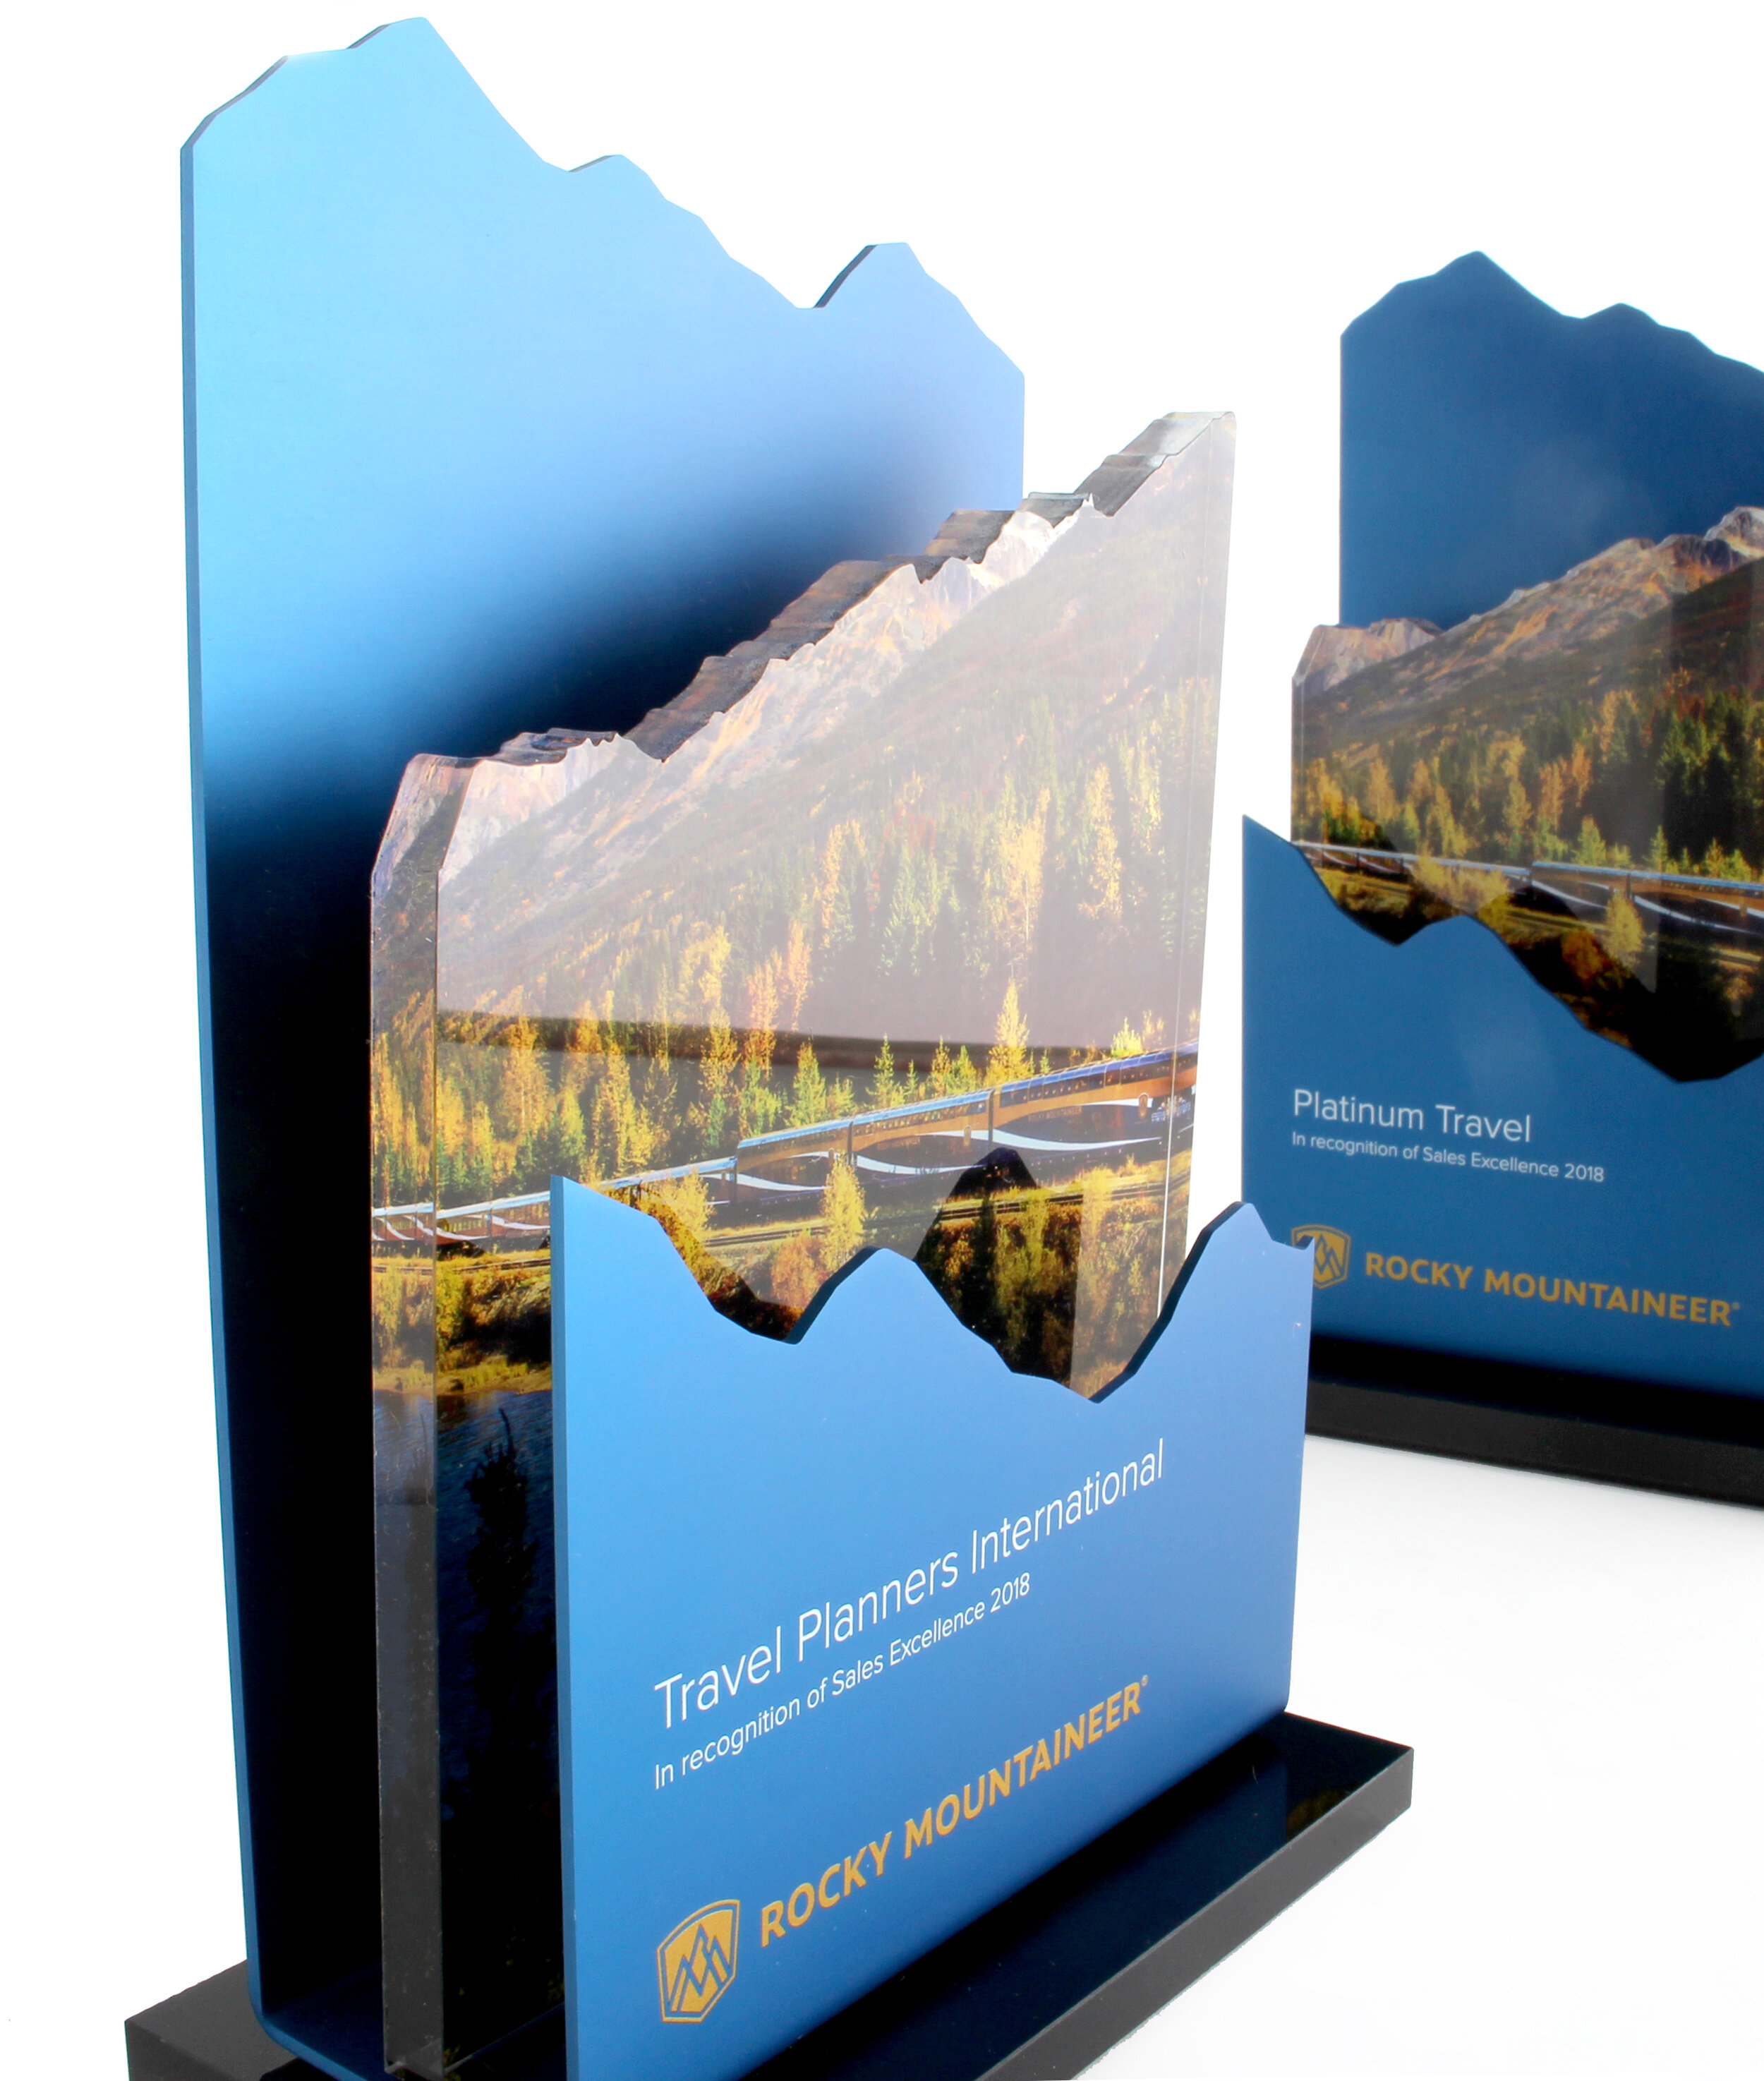 rocky mountaineer custom travel awards sales excellence 2